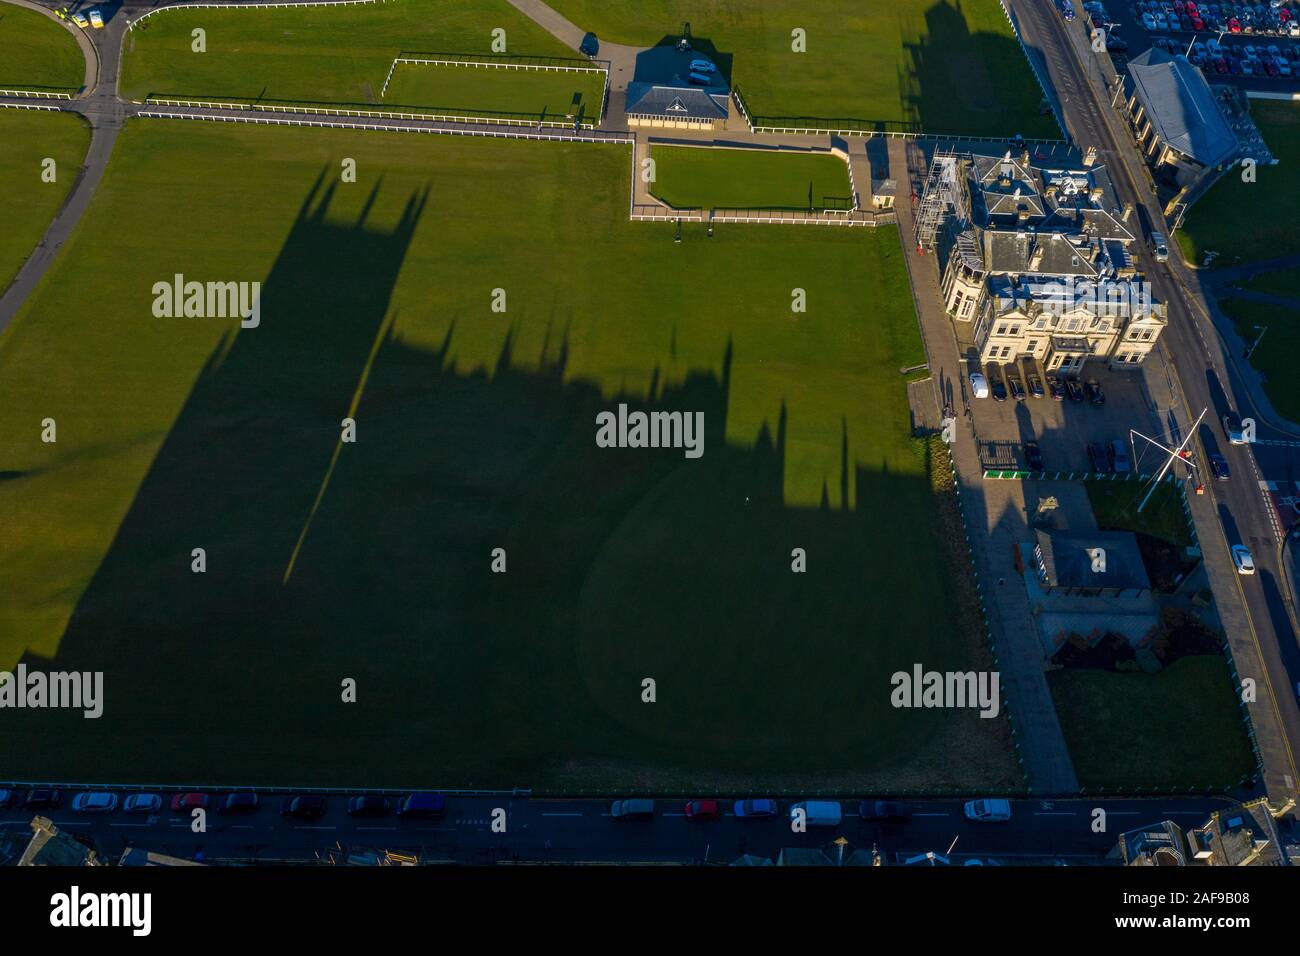 Shadows on the 18th and 1st holes of the Old Course, St Andrews, Scotland. Stock Photo